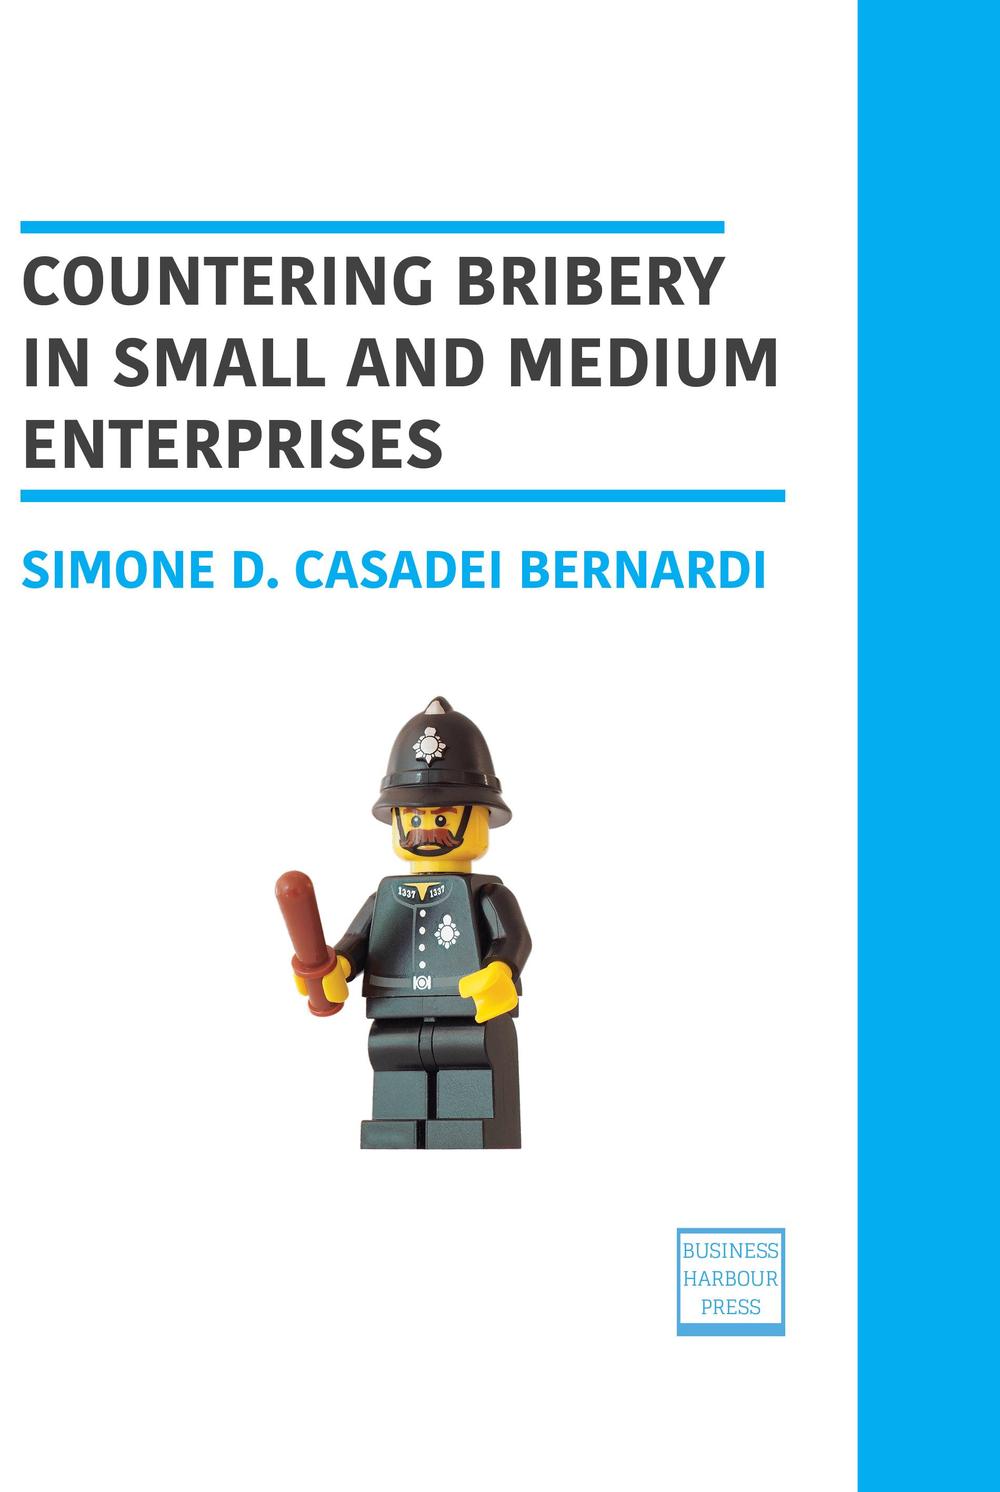 Countery bribery in small and medium entreprises